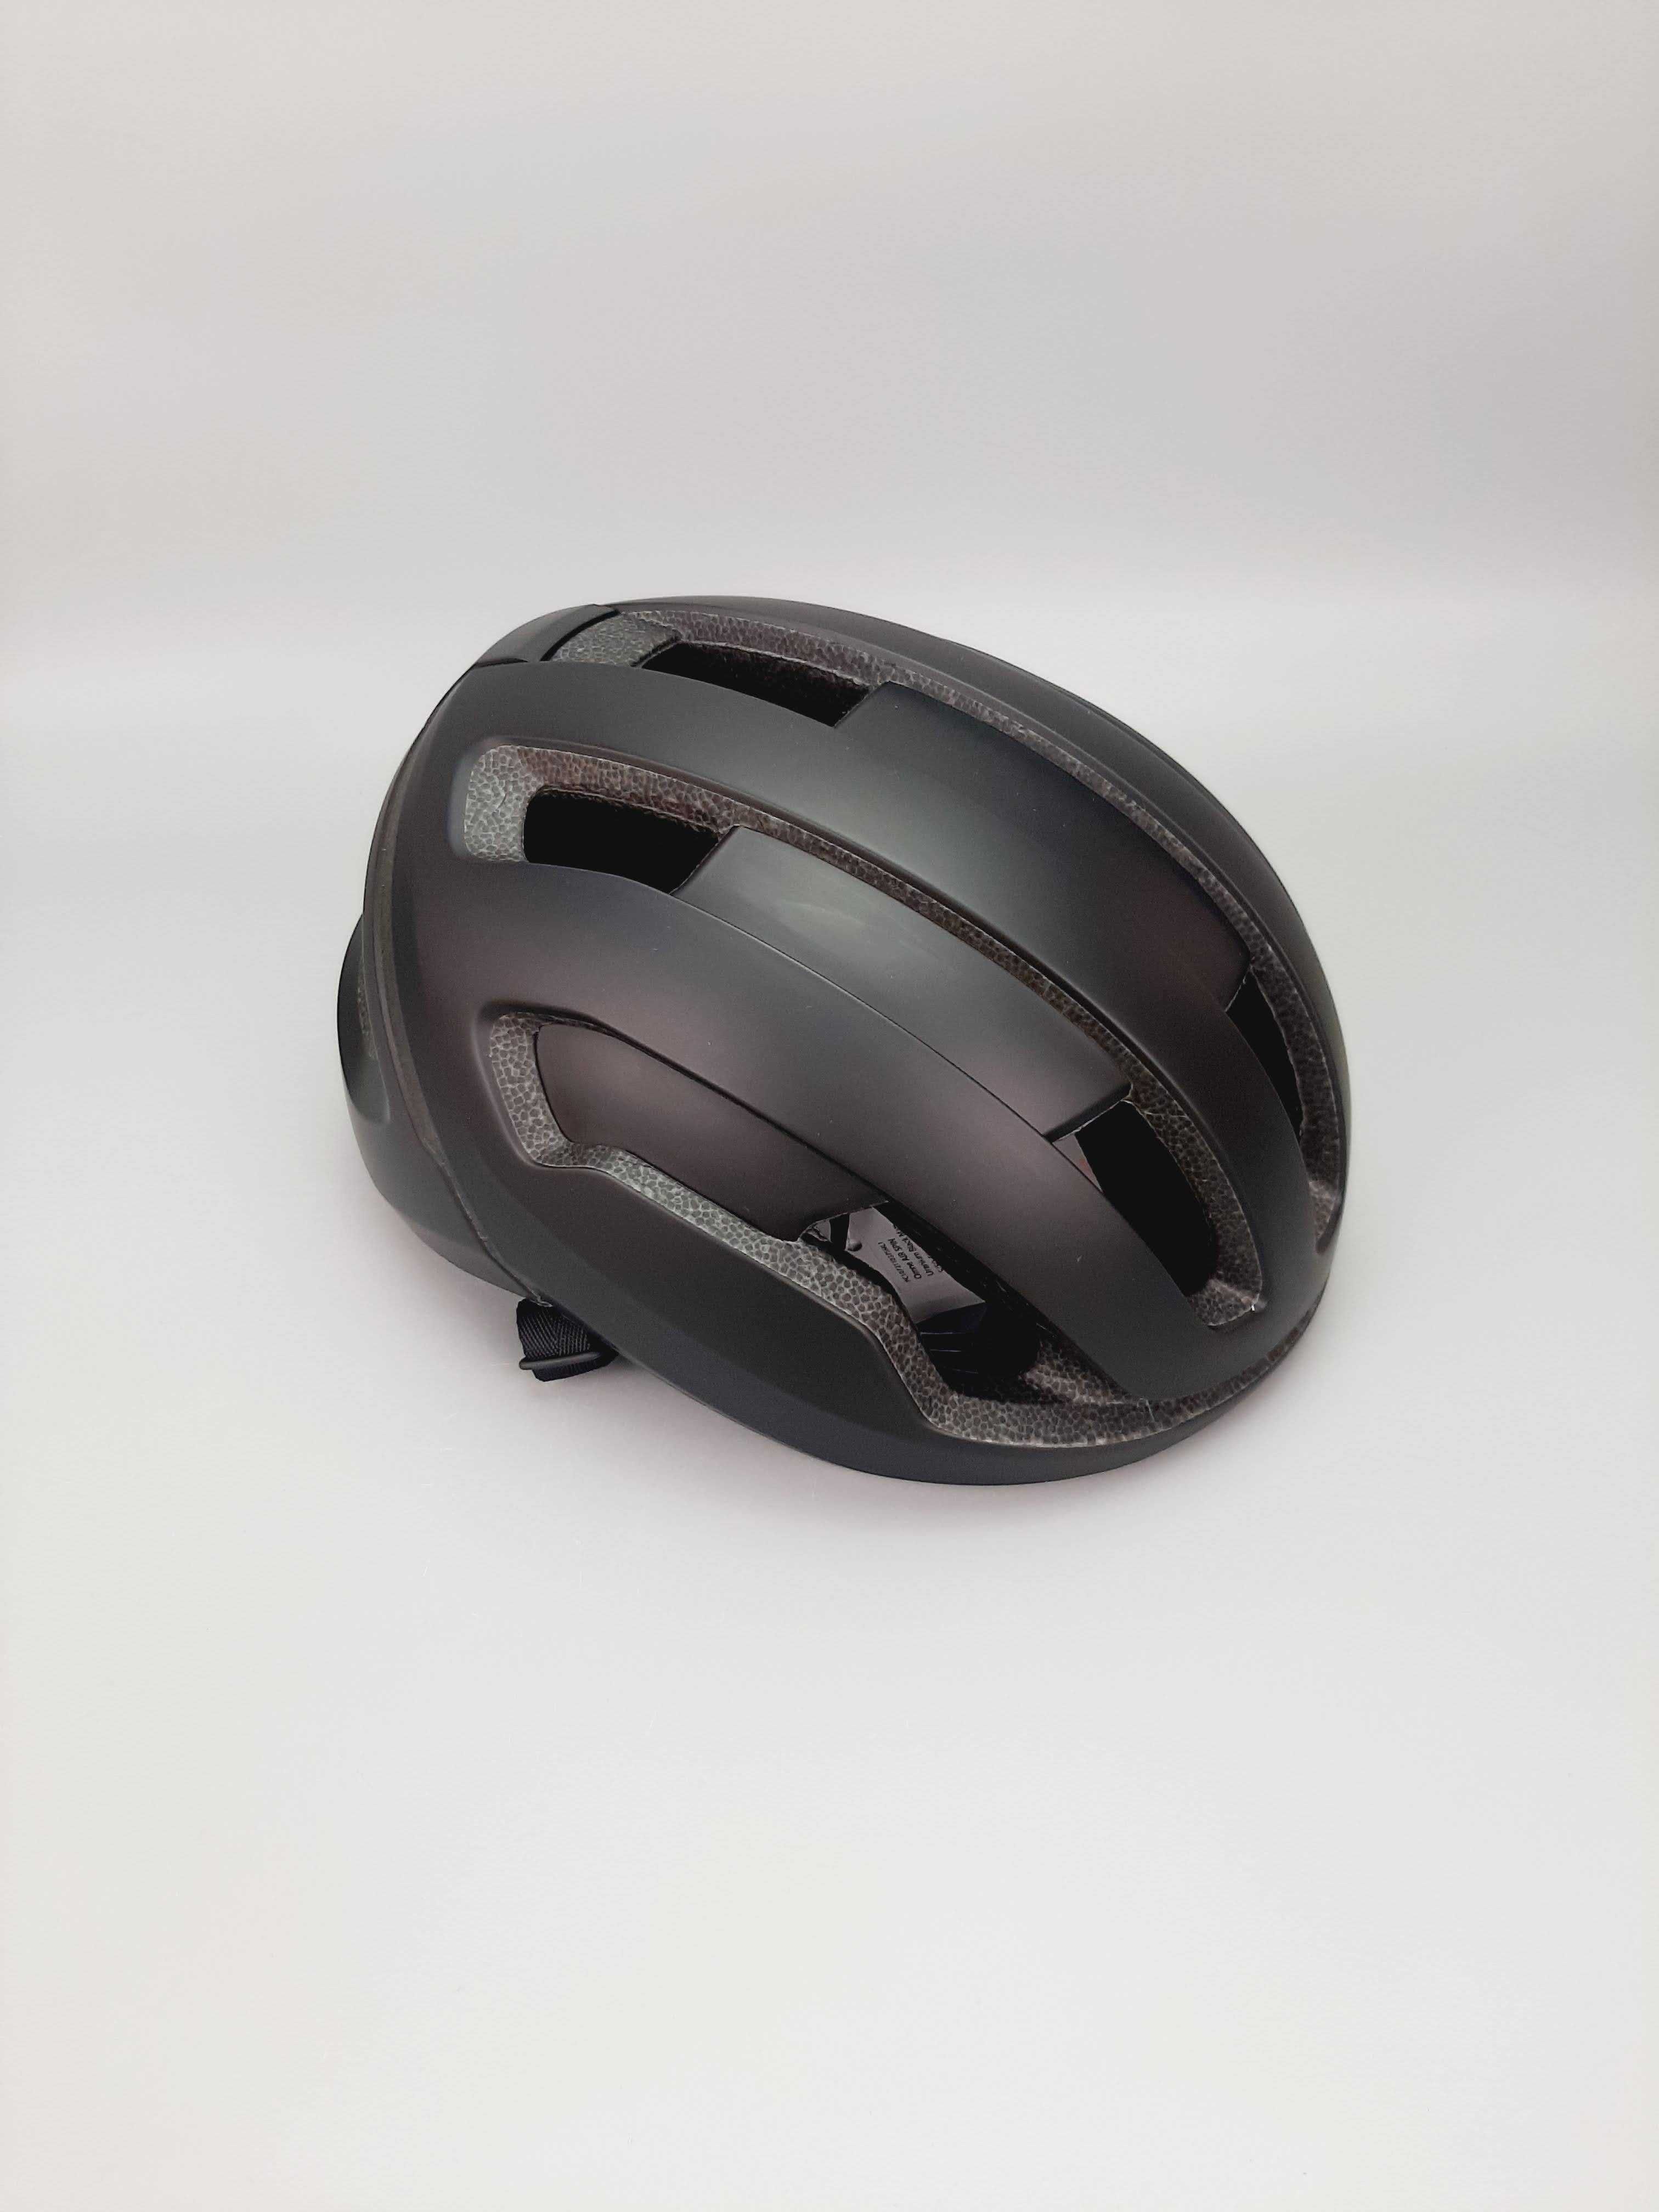 Kask Rowerowy POC OMNE AIR Spin roz. S 50-56cm